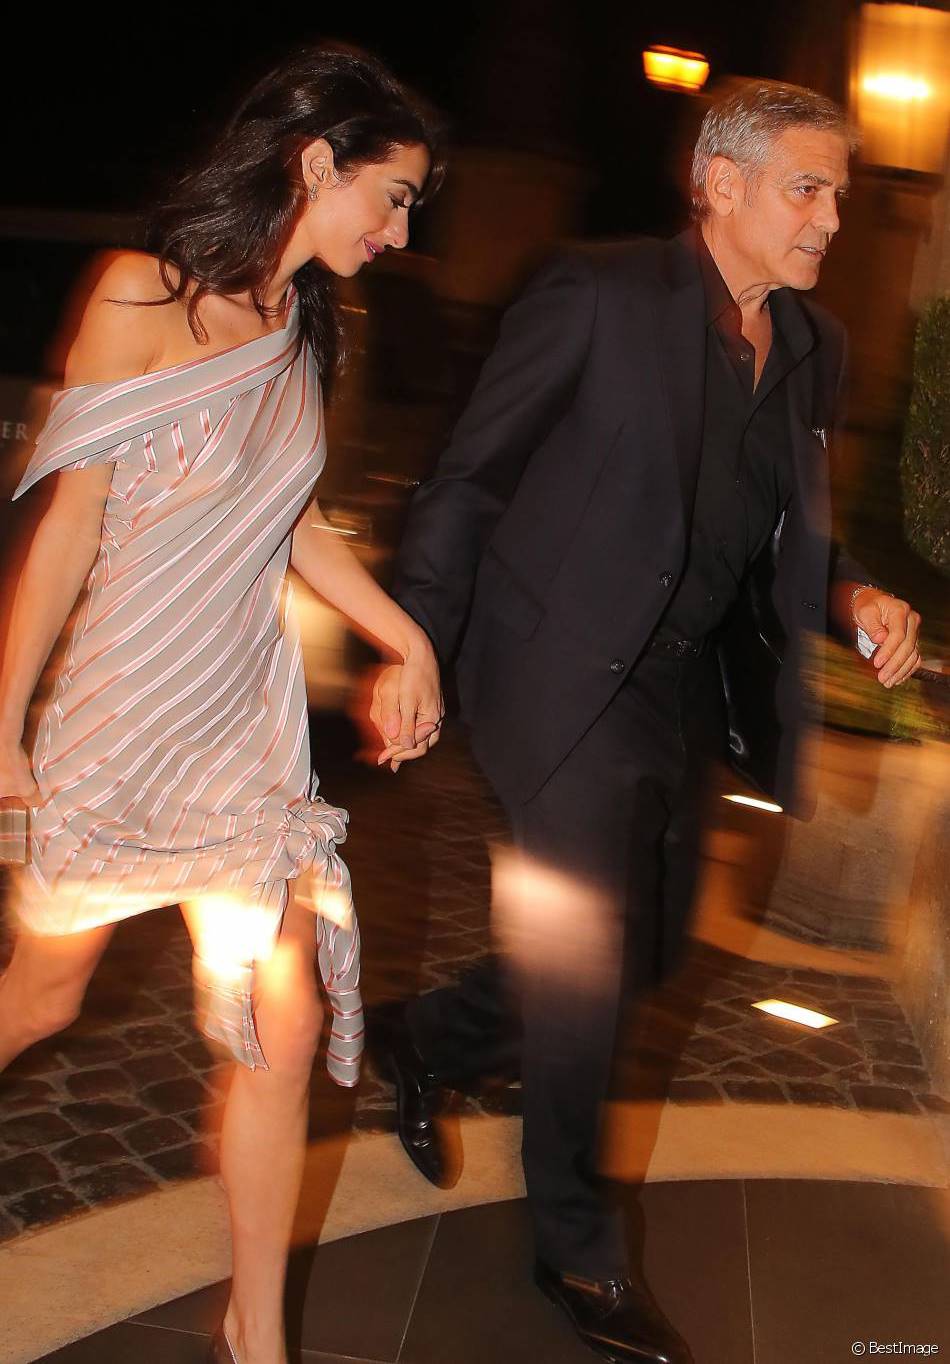 Amal Clooney spotted in a Monse striped dress in Rome, Italy 29.05.2016.